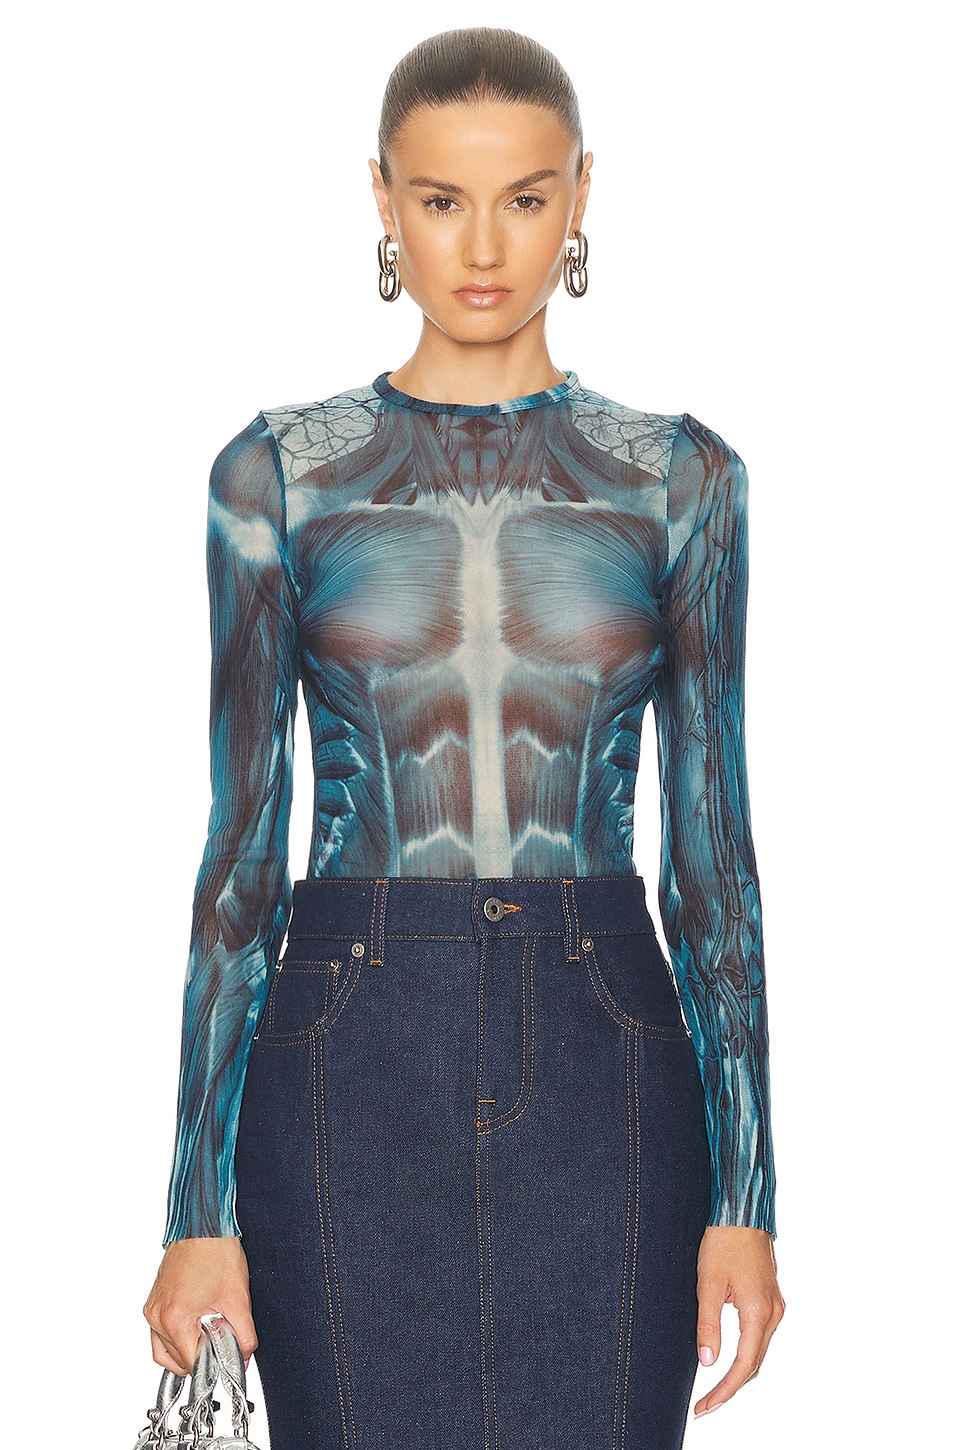 Image 1 of Jean Paul Gaultier Ecorche Mesh Printed Long Sleeve Top in Blue, Light Blue, & White